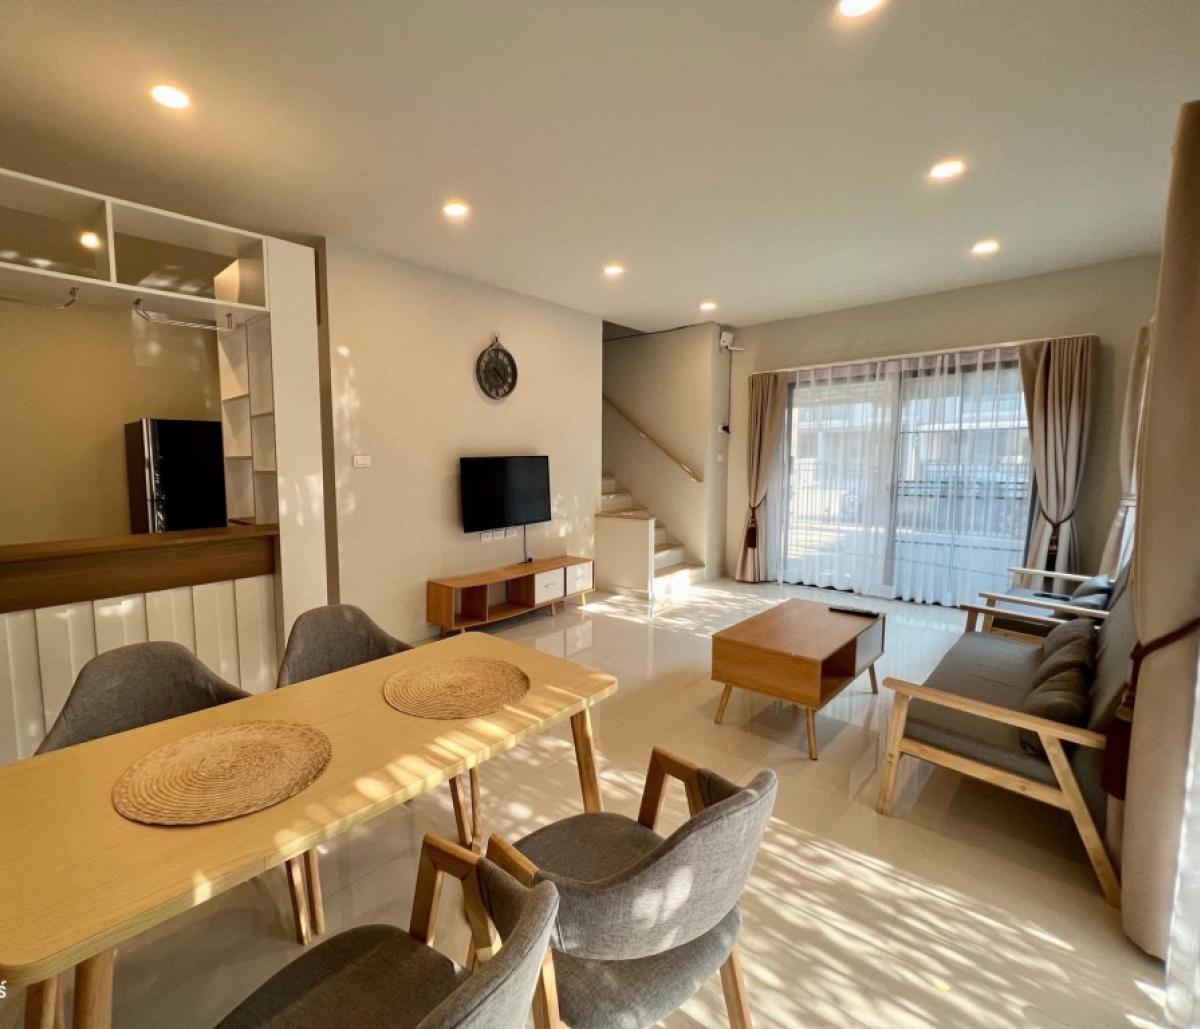 For RentTownhousePathum Thani,Rangsit, Thammasat : #Ready to reserve first🔥Corner townhome, width 5.7 meters, beautifully decorated, has a relaxing garden, lots of floor space, convenient parking, good Feng Shui, very nice house.